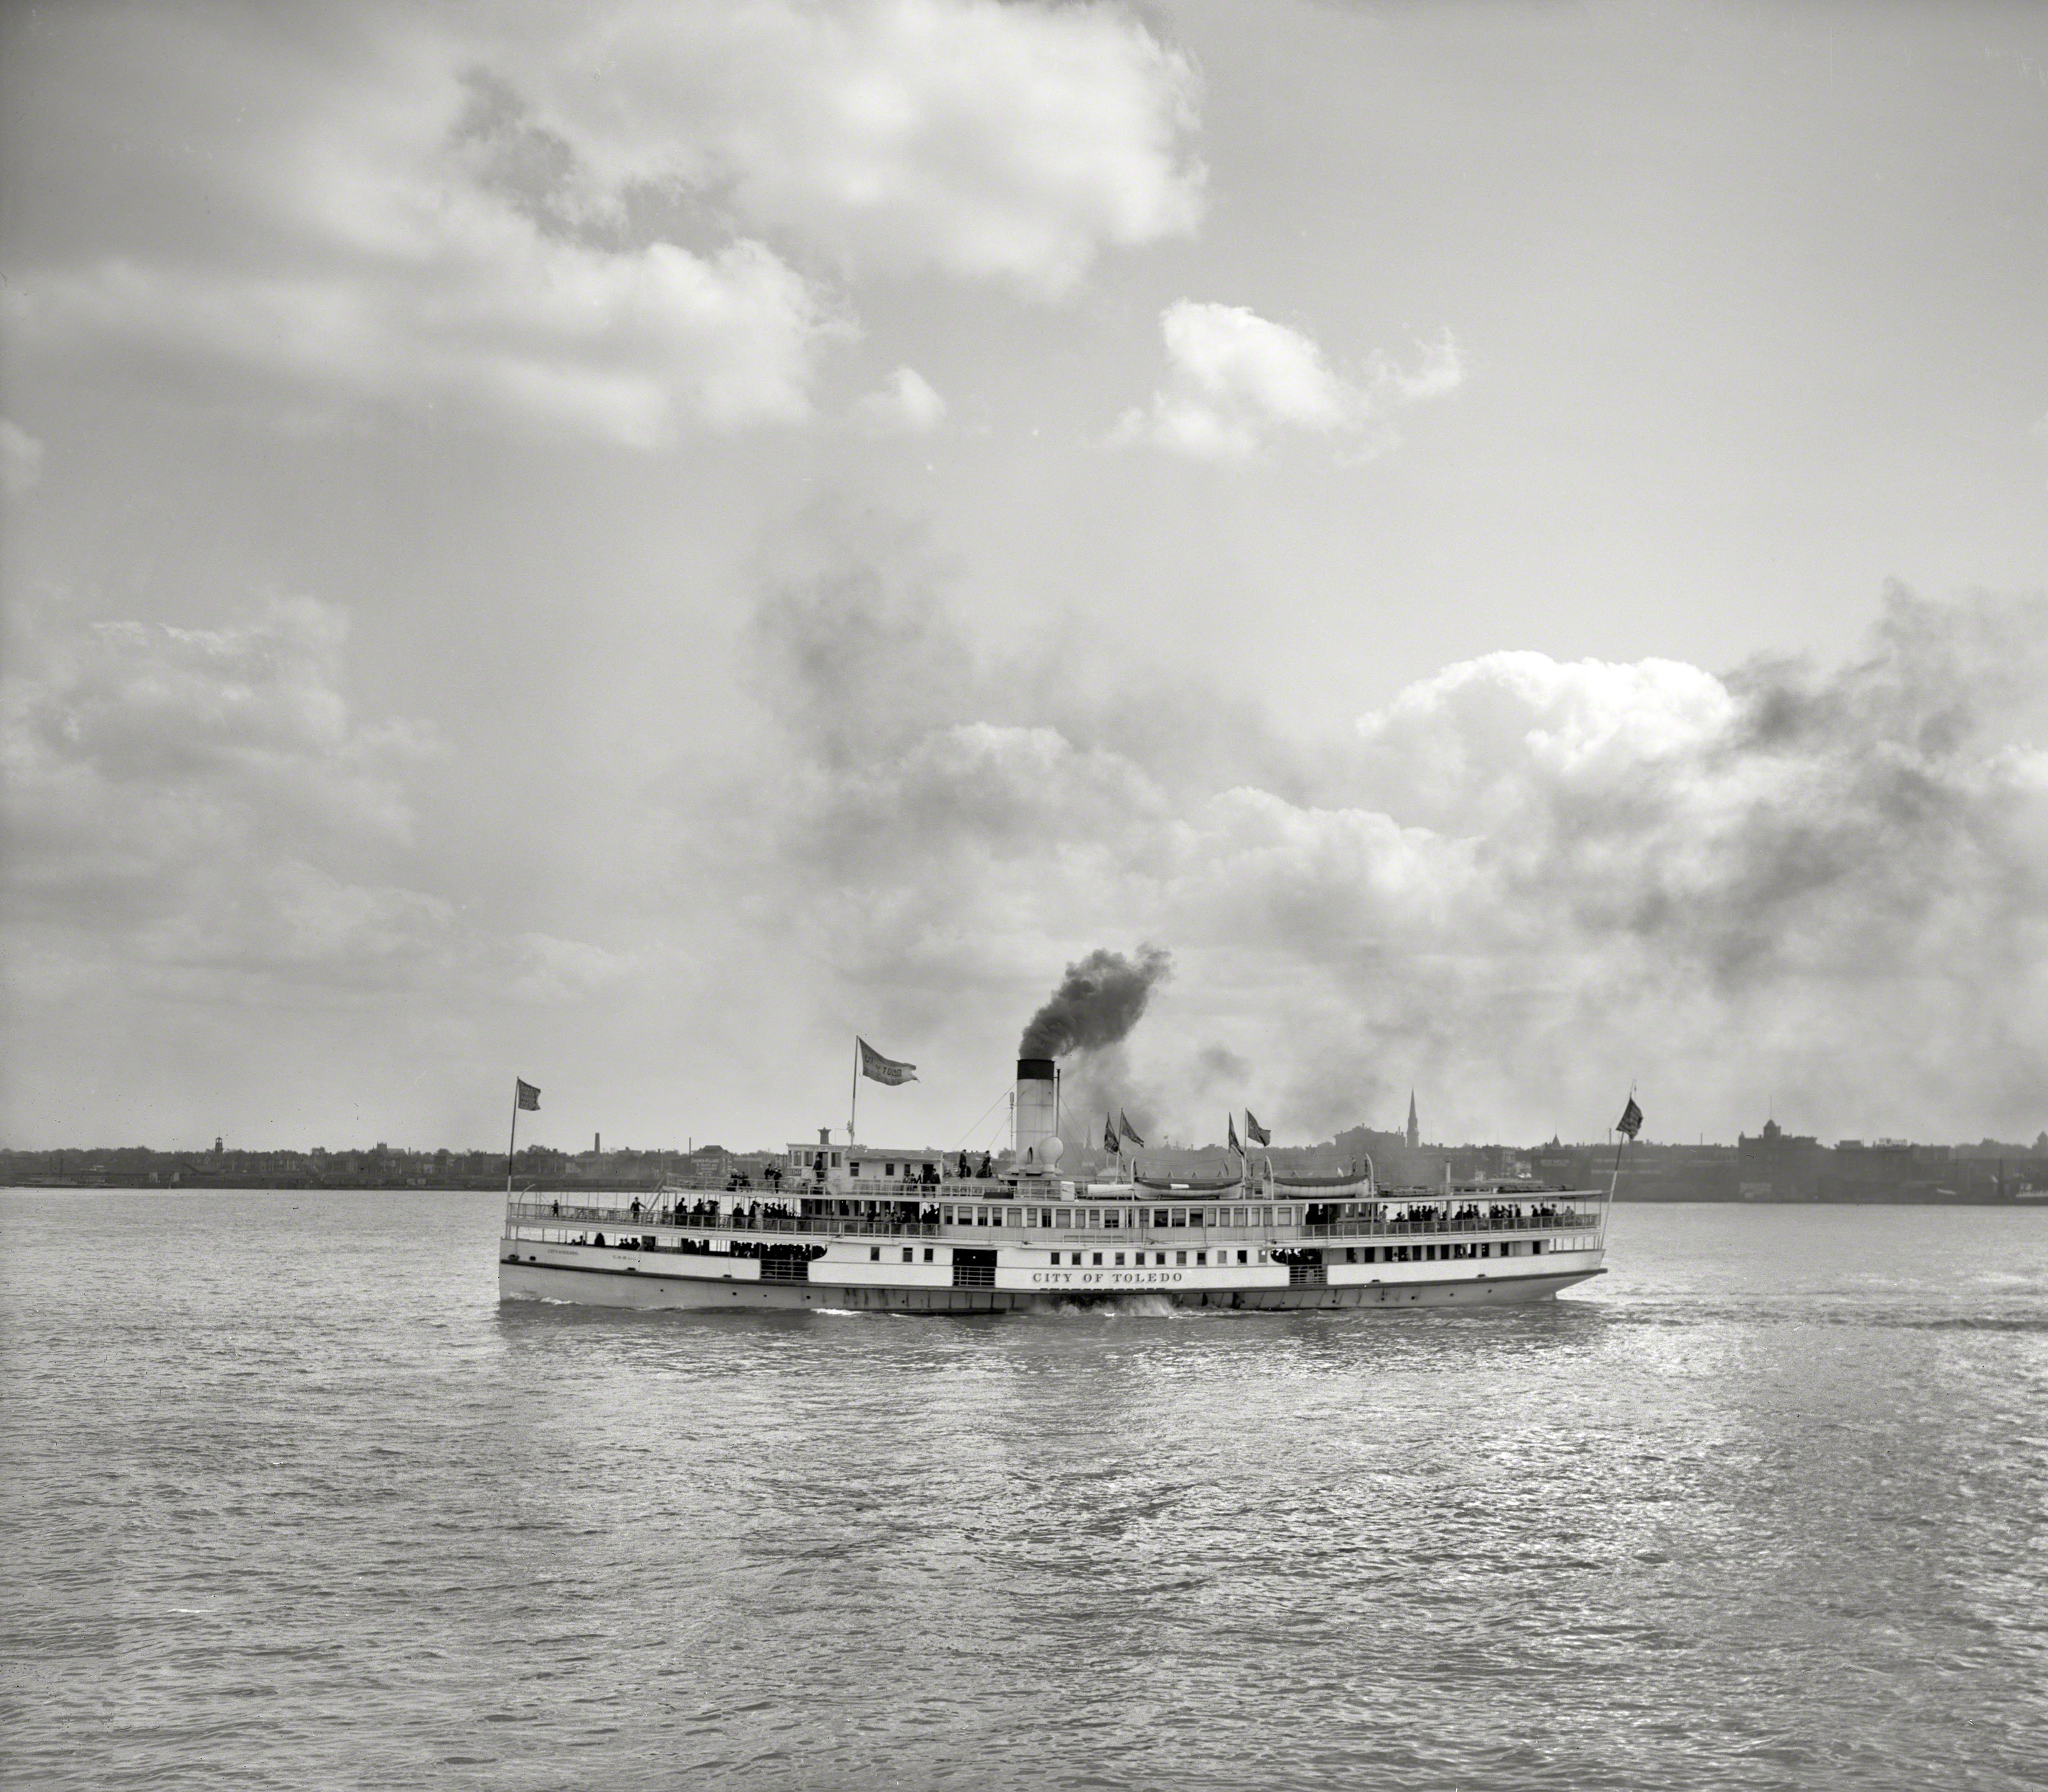 Detroit circa 1903. "Steamer City of Toledo." Sidewheeler smoke on the water. 8x10 inch dry plate glass negative, Detroit Publishing Company. View full size.